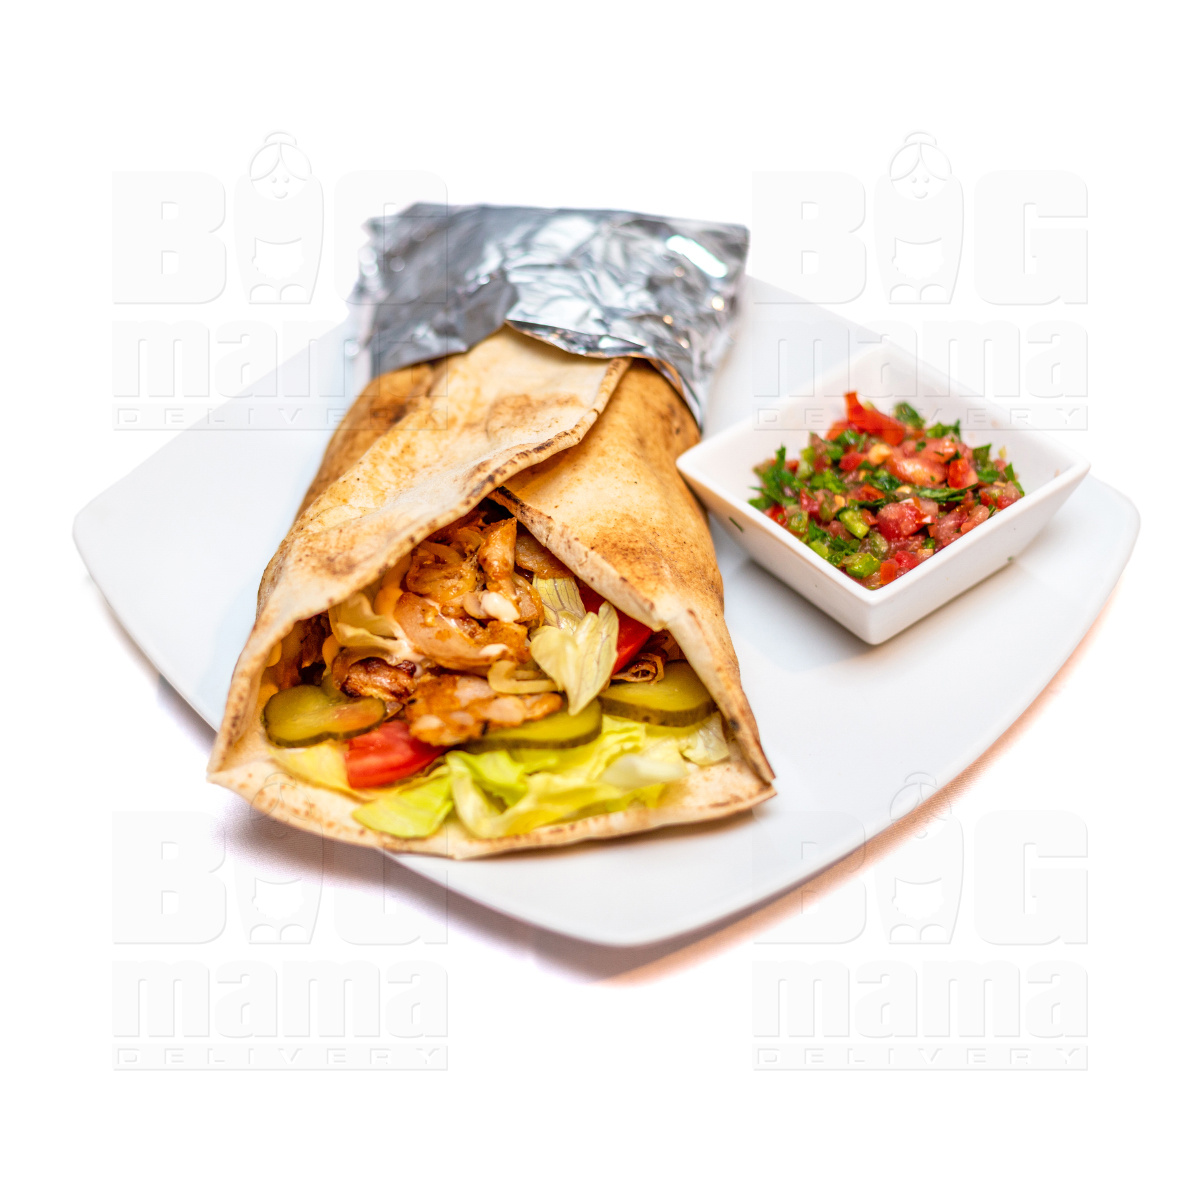 Product #227 image - Big shaorma with chicken breast